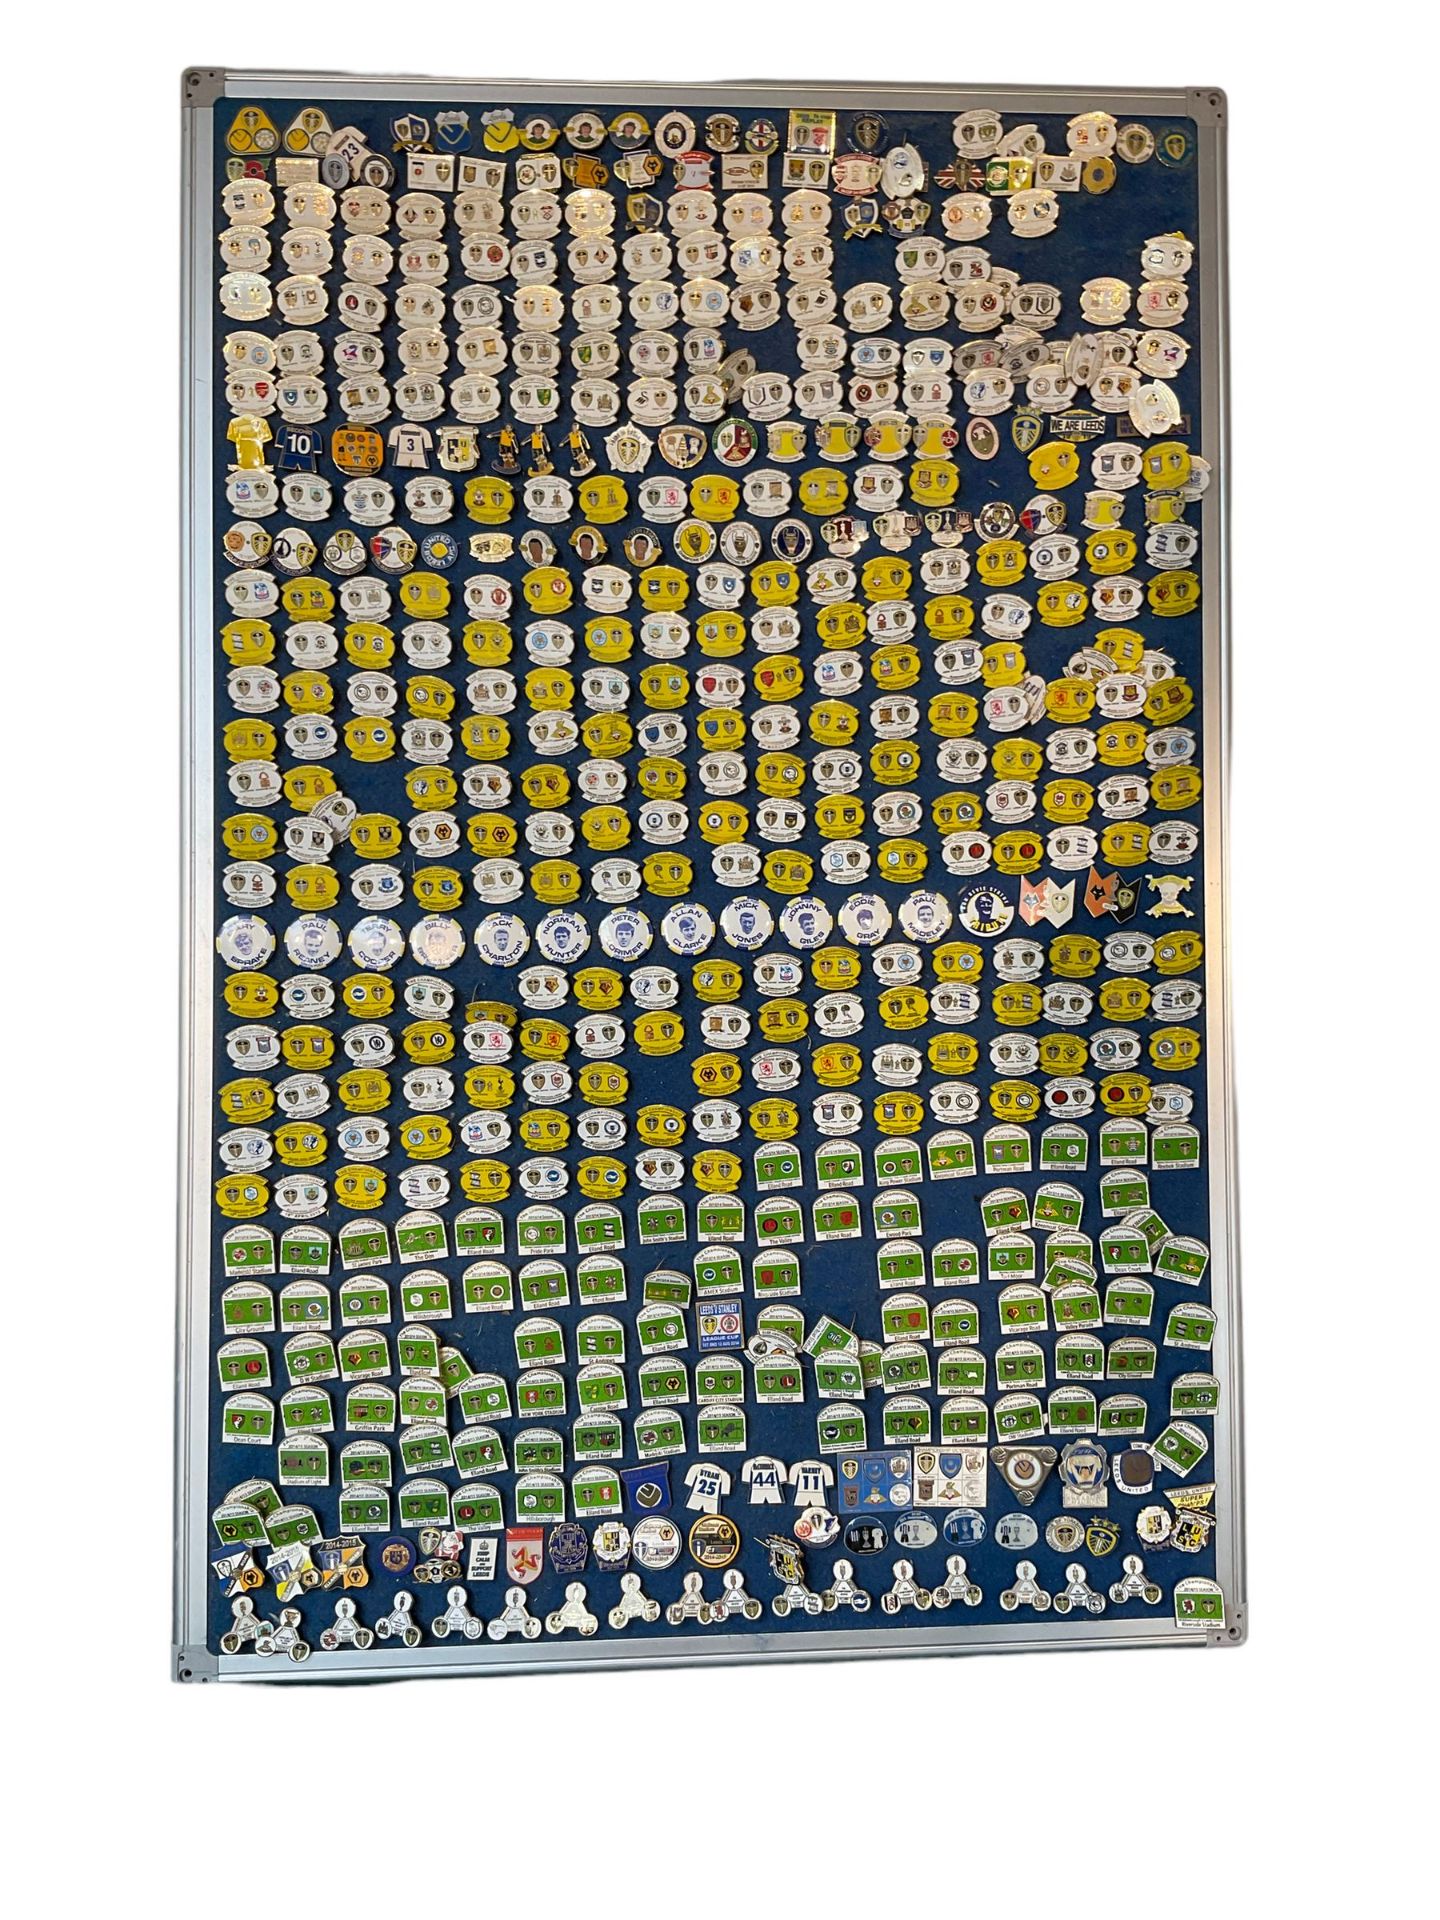 Leeds United football club - approximately five-hundred pin badges including match badges